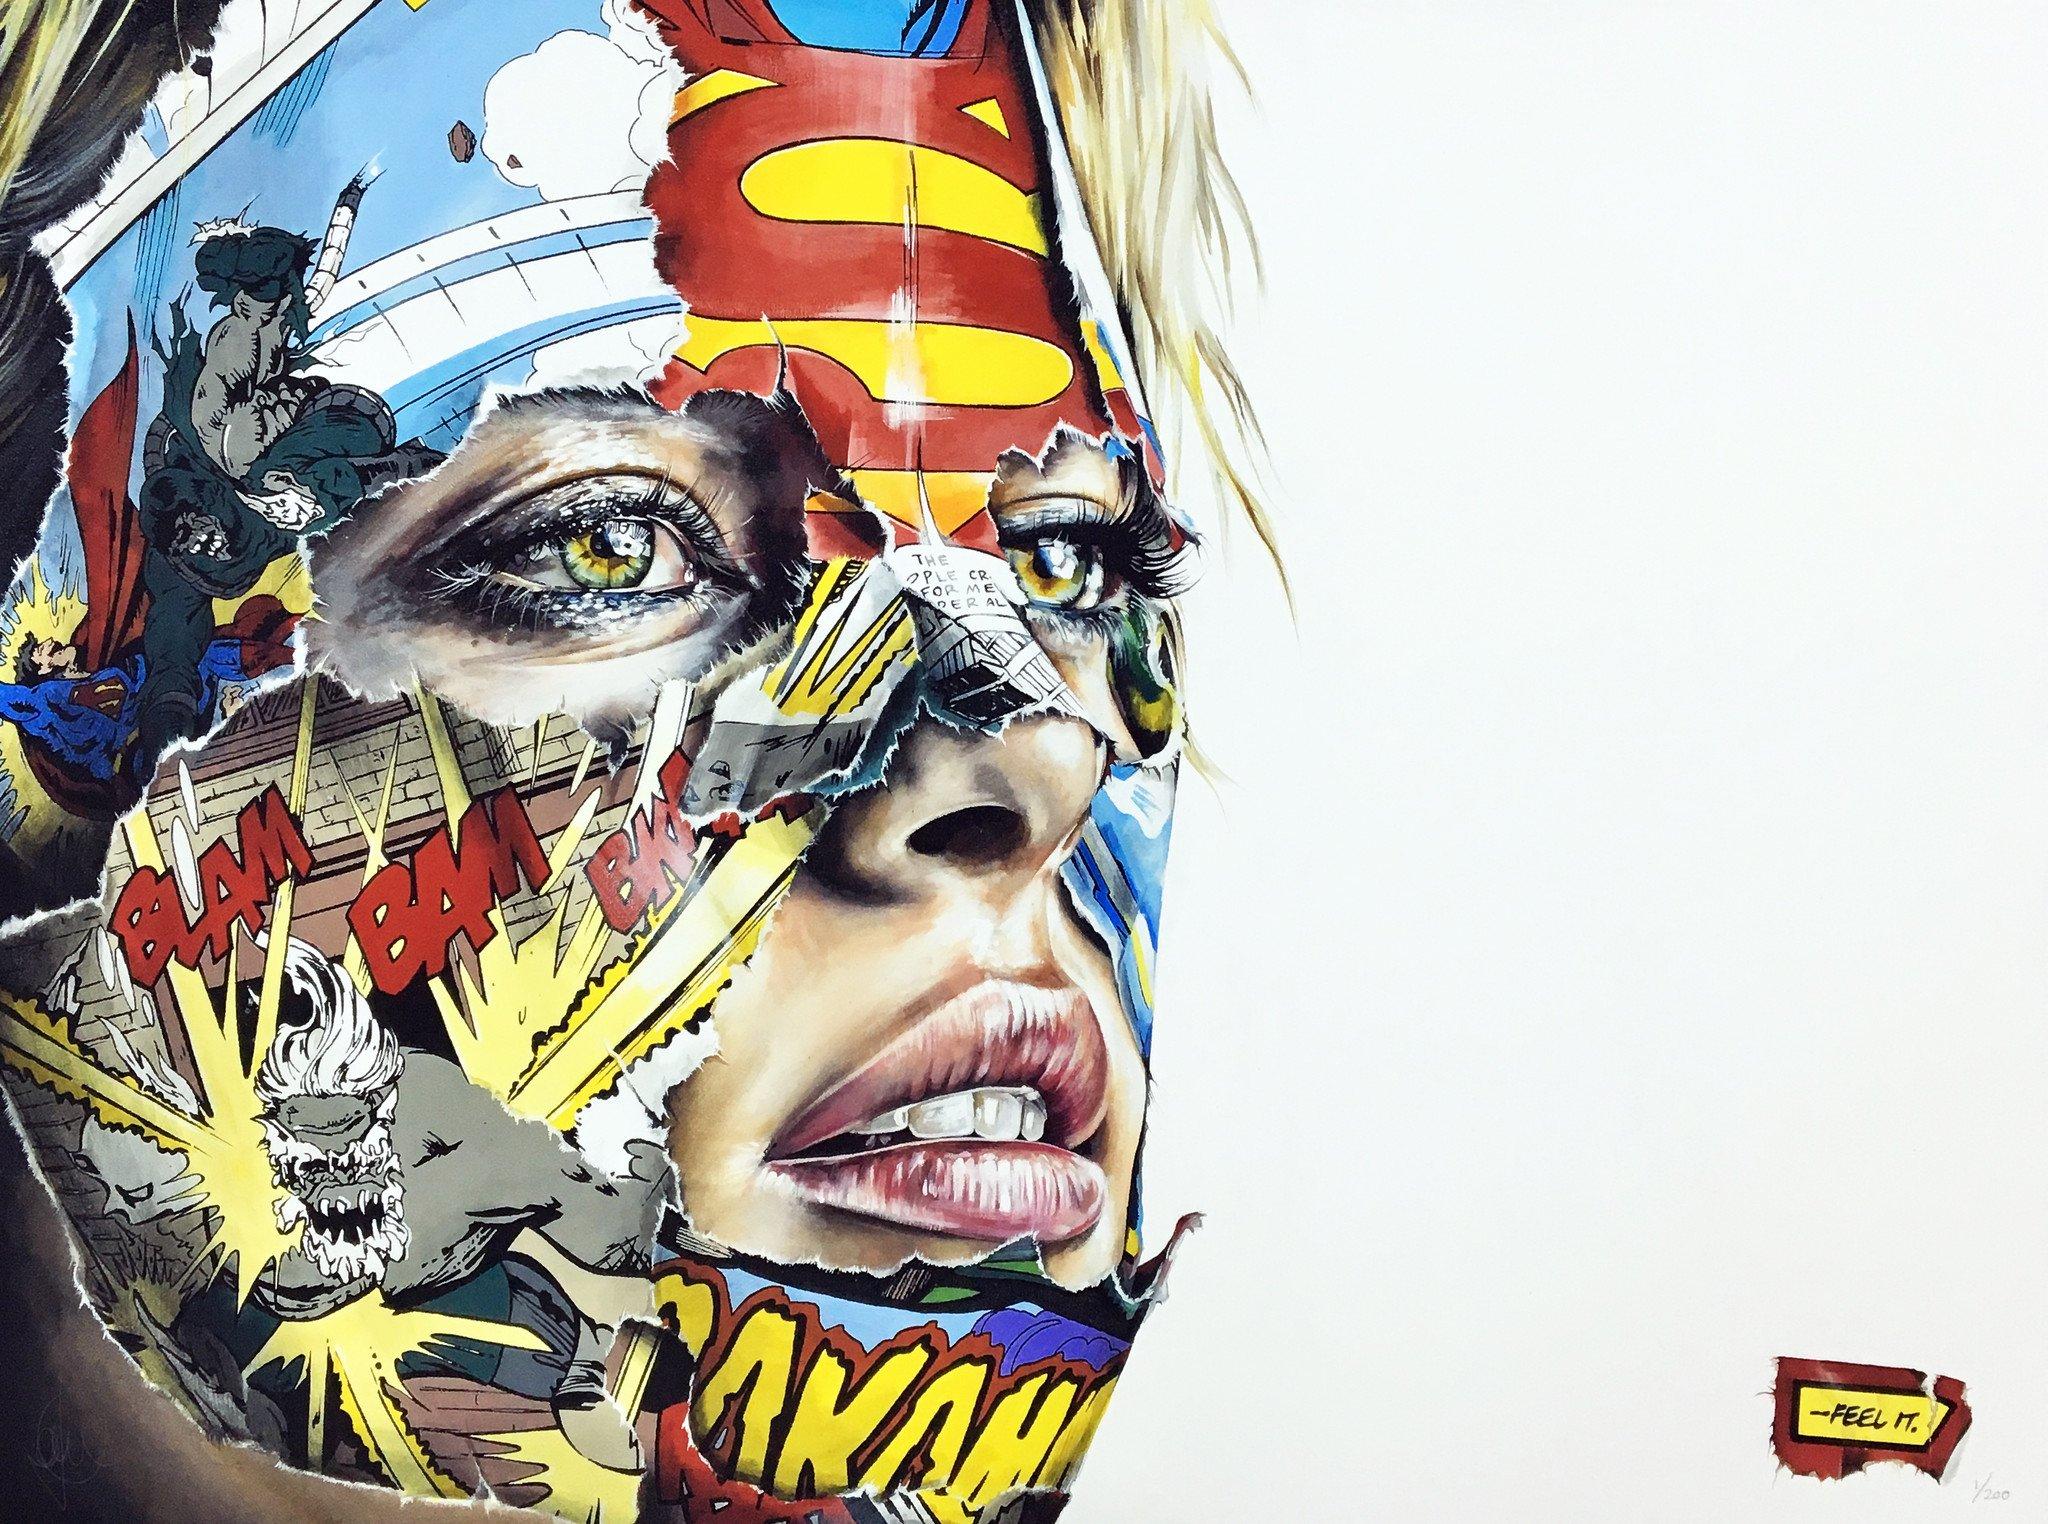 Limited edition glicée C-print on Moab paper by Canadian artist Sandra Chevrier, from an edition of 200, signed and numbered by the artist. Professionally framed in a white shadowbox frame; unframed size 26 in x 34.5 in.
Sandra Chevrier currently